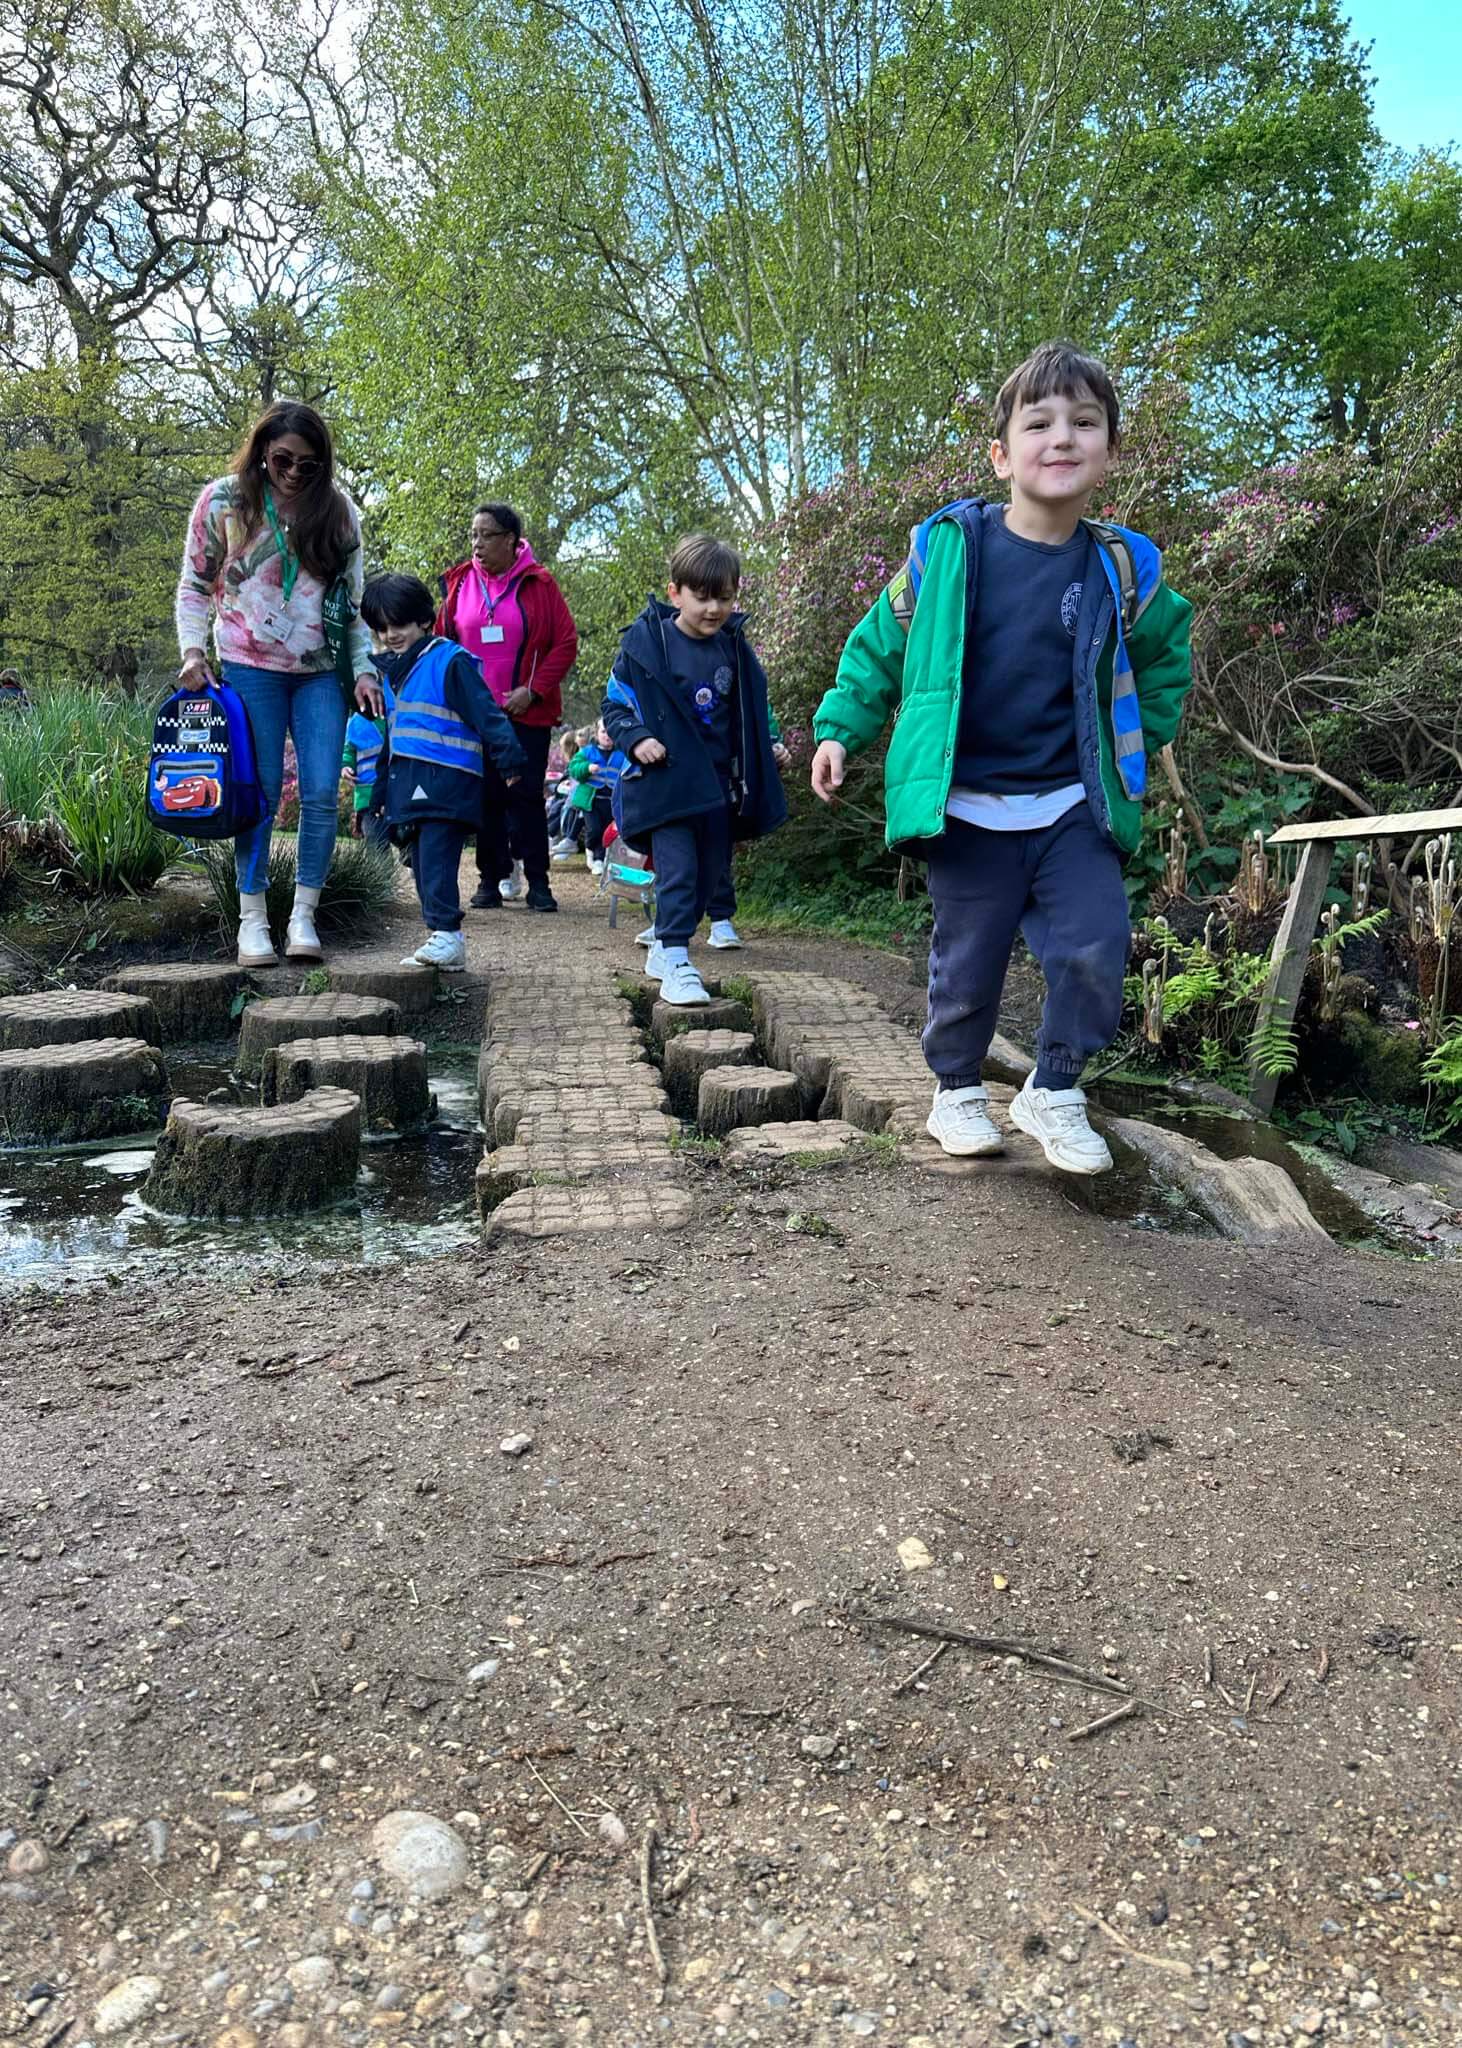 Kindergarten pupils on stepping stones | Ibstock Place School, a private school near Richmond, Barnes, Putney, Kingston, and Wandsworth.